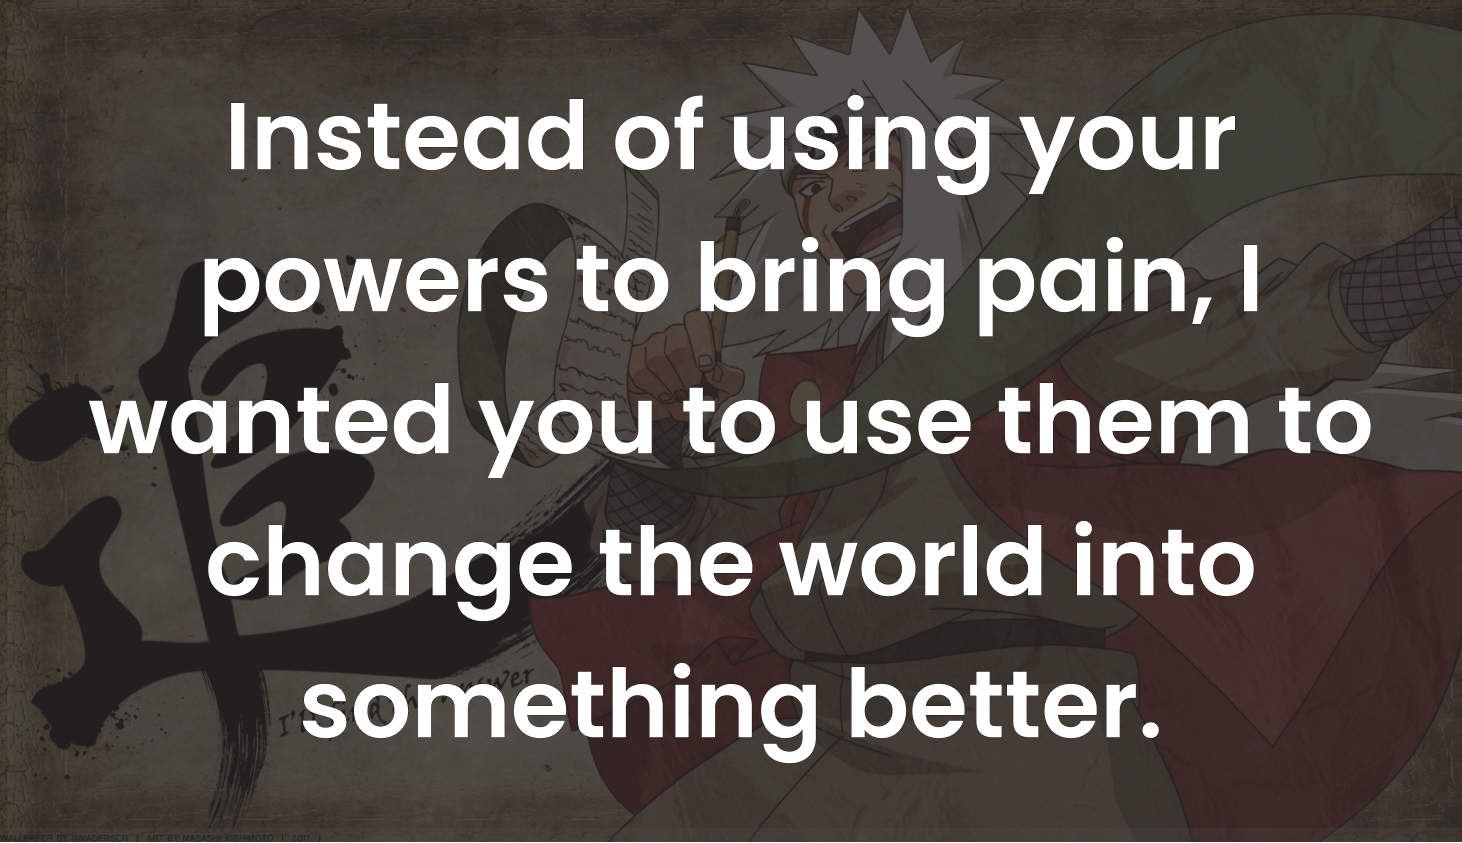 Instead of using your powers to bring pain, I wanted you to use them to change the world into something better.